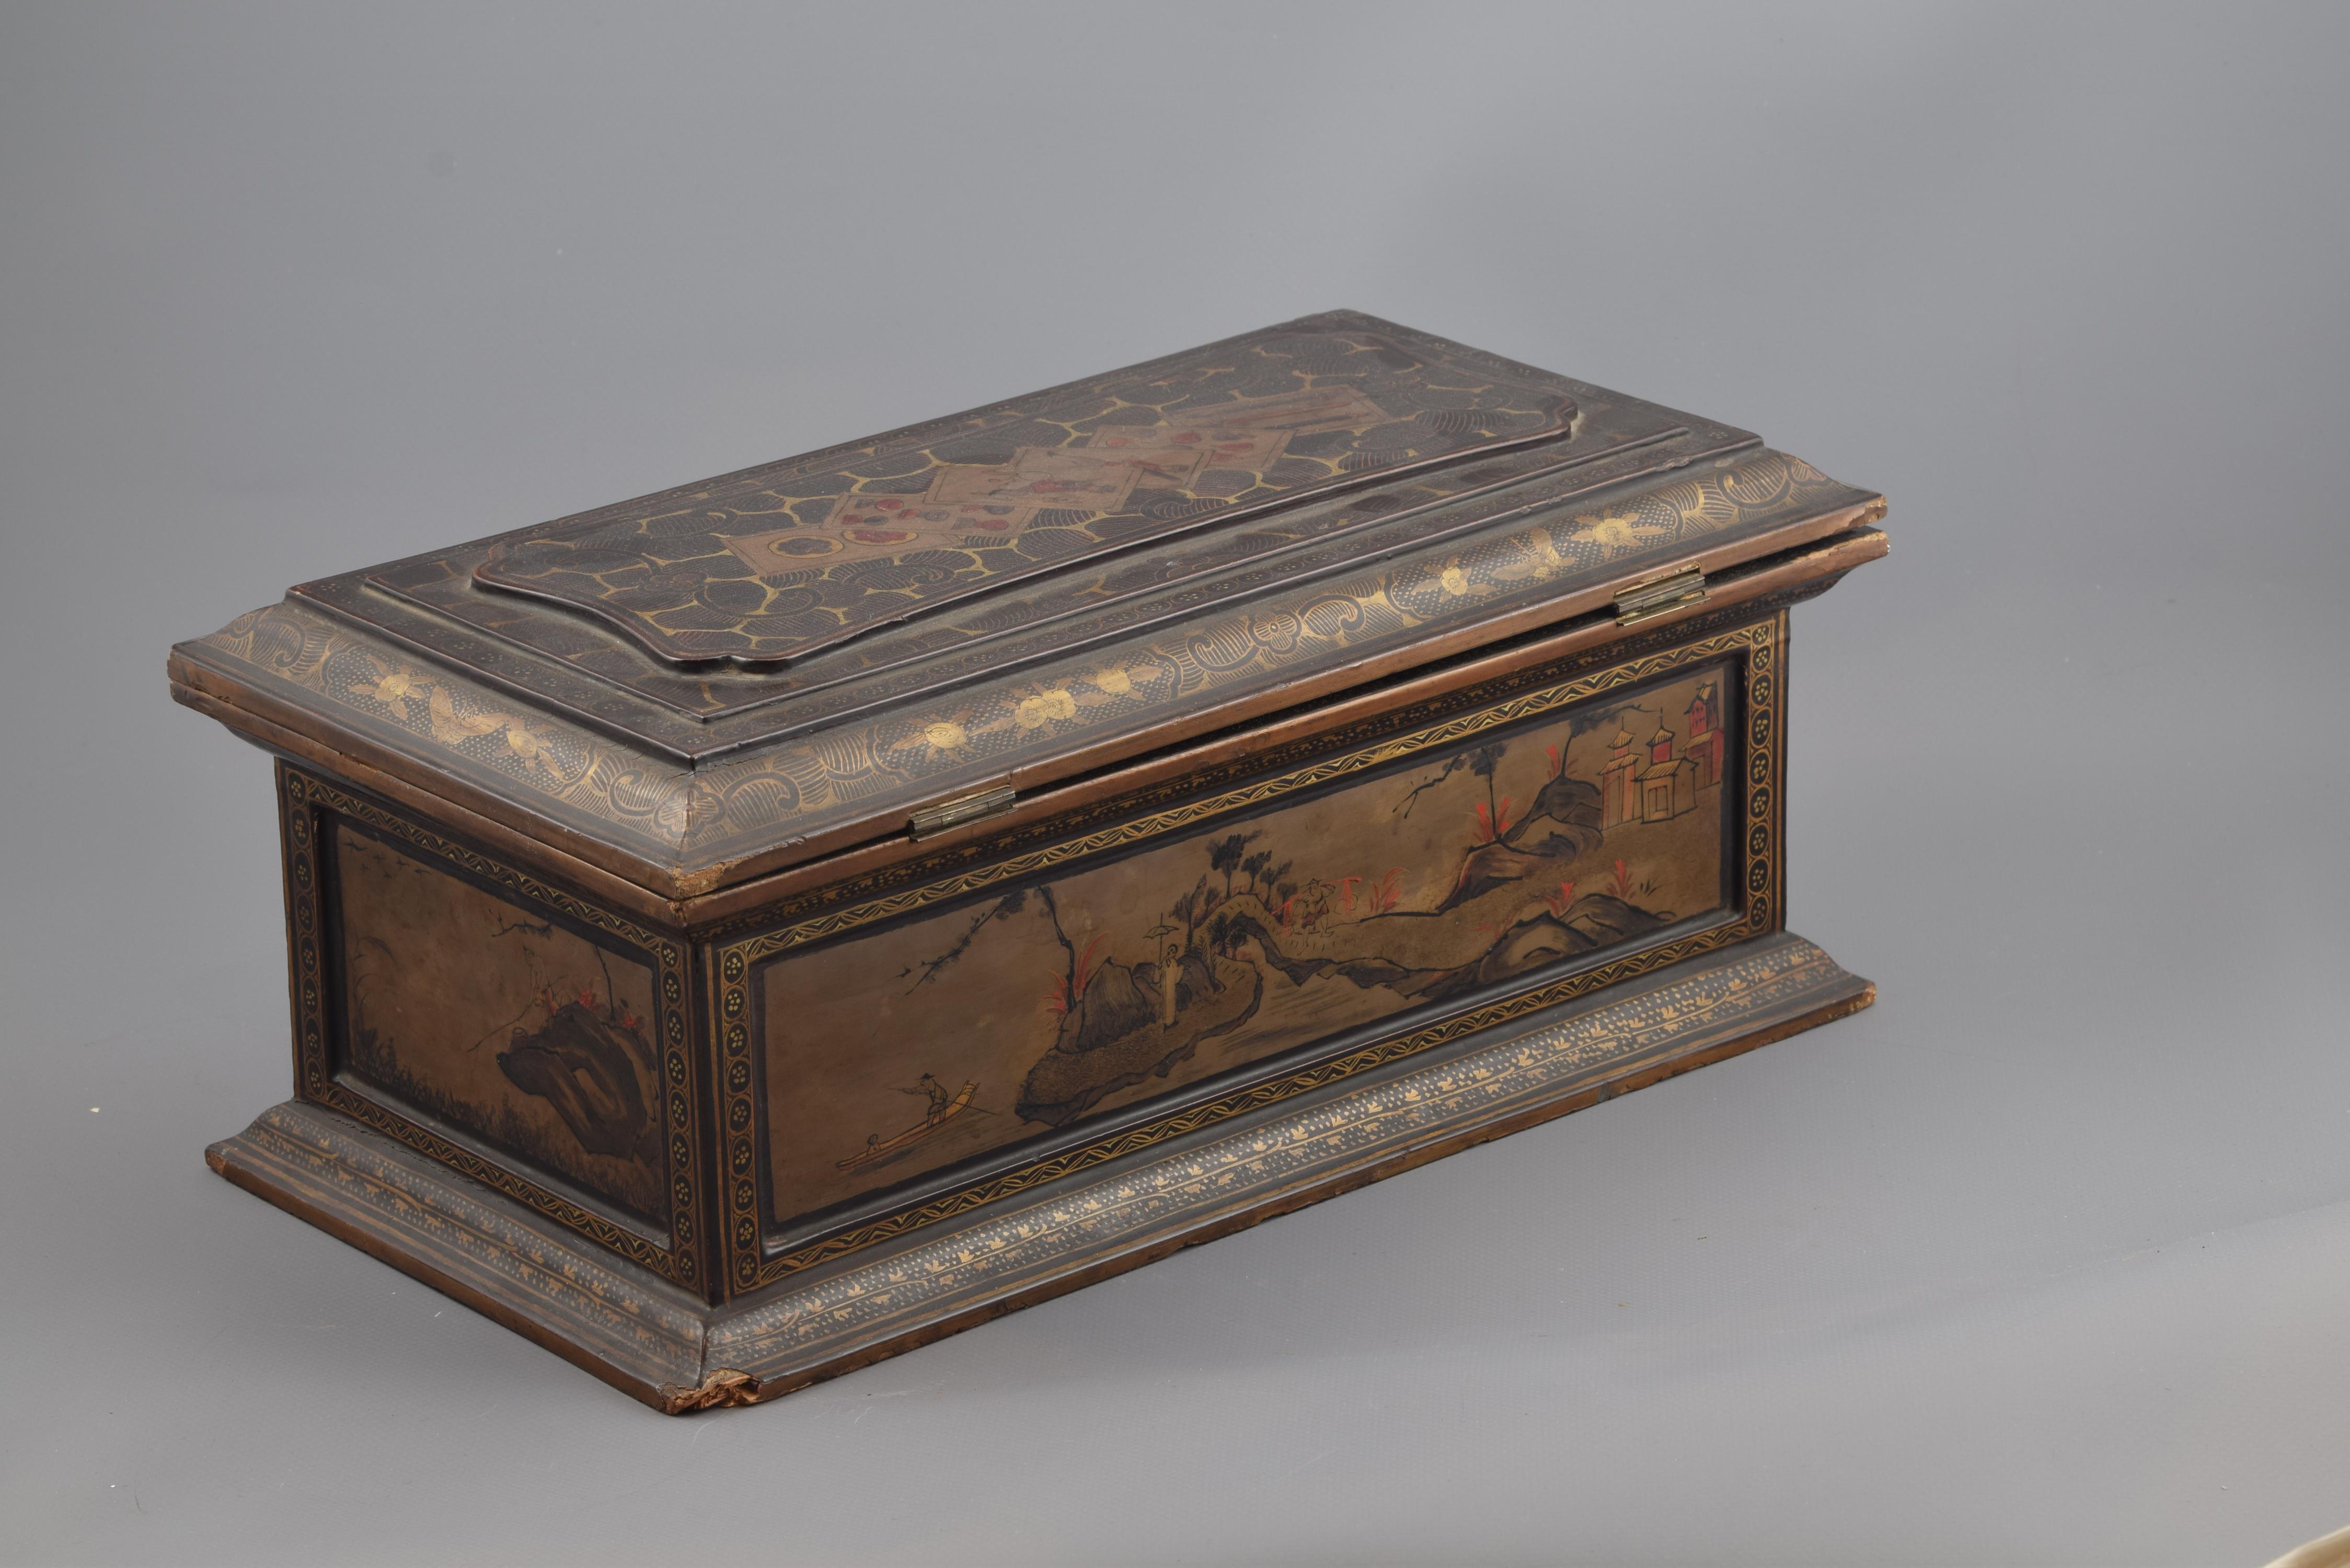 European Deck of Cards Box, Lacquer, Wood, 19th Century